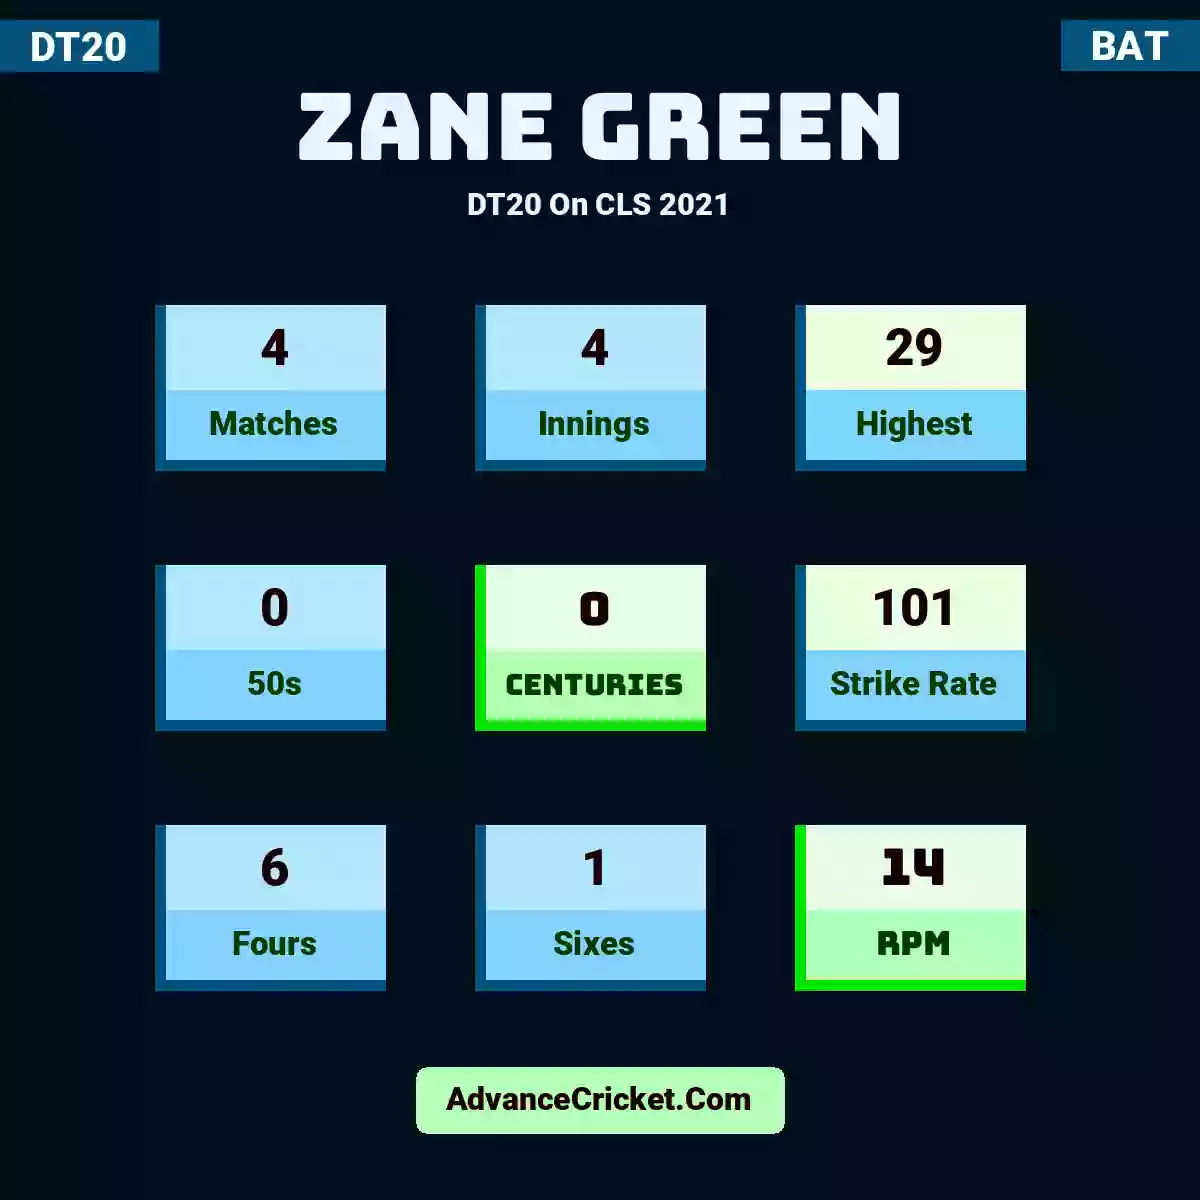 Zane Green DT20  On CLS 2021, Zane Green played 4 matches, scored 29 runs as highest, 0 half-centuries, and 0 centuries, with a strike rate of 101. Z.Green hit 6 fours and 1 sixes, with an RPM of 14.